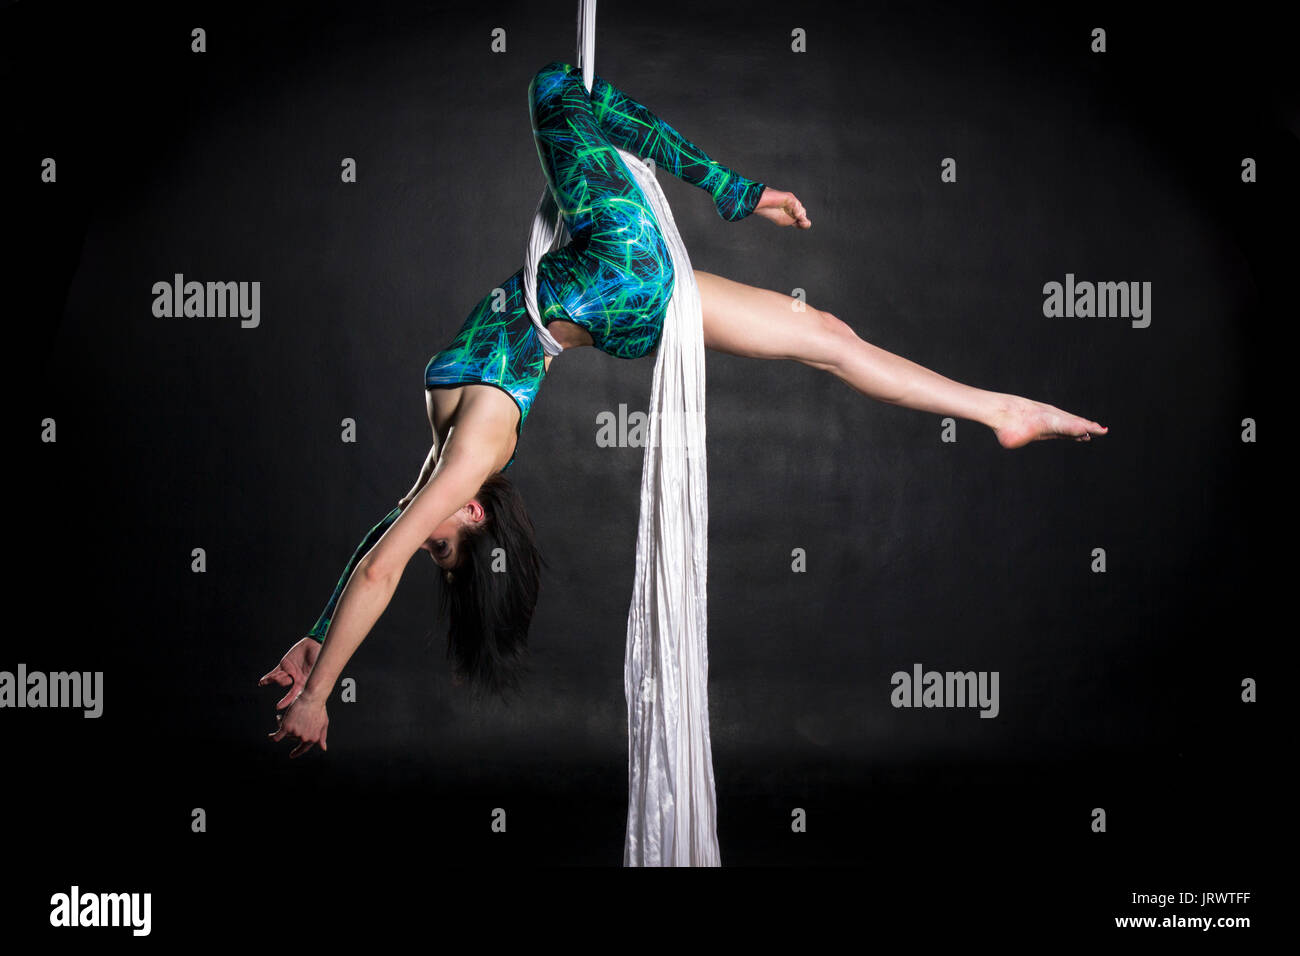 Aerialist woman doing some flexibility and strength tricks on silks Stock Photo